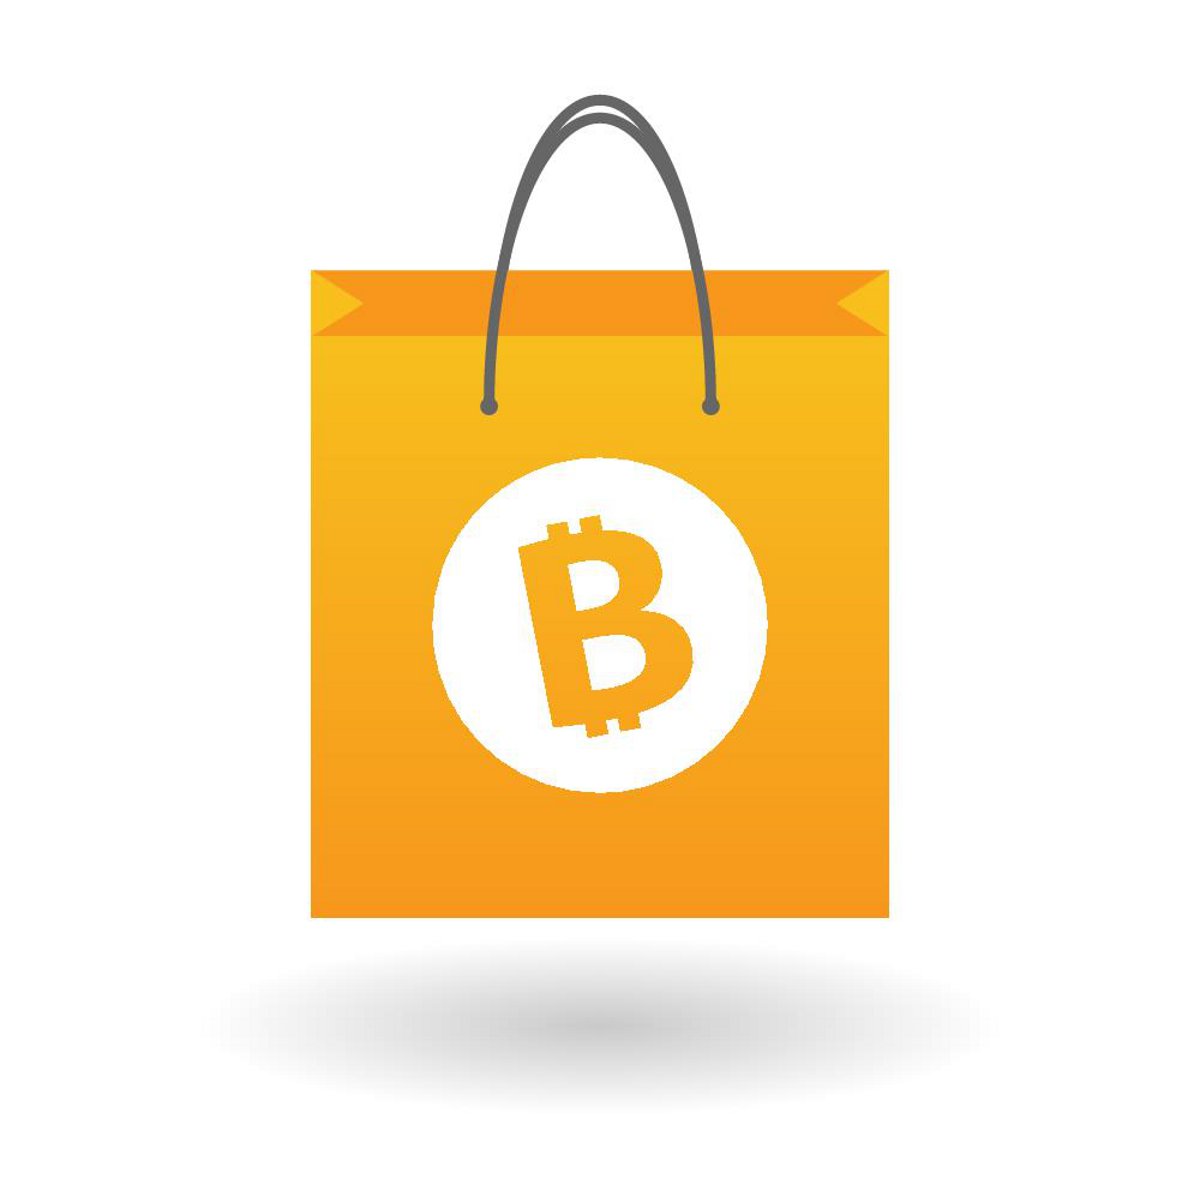 what can you buy using bitcoin